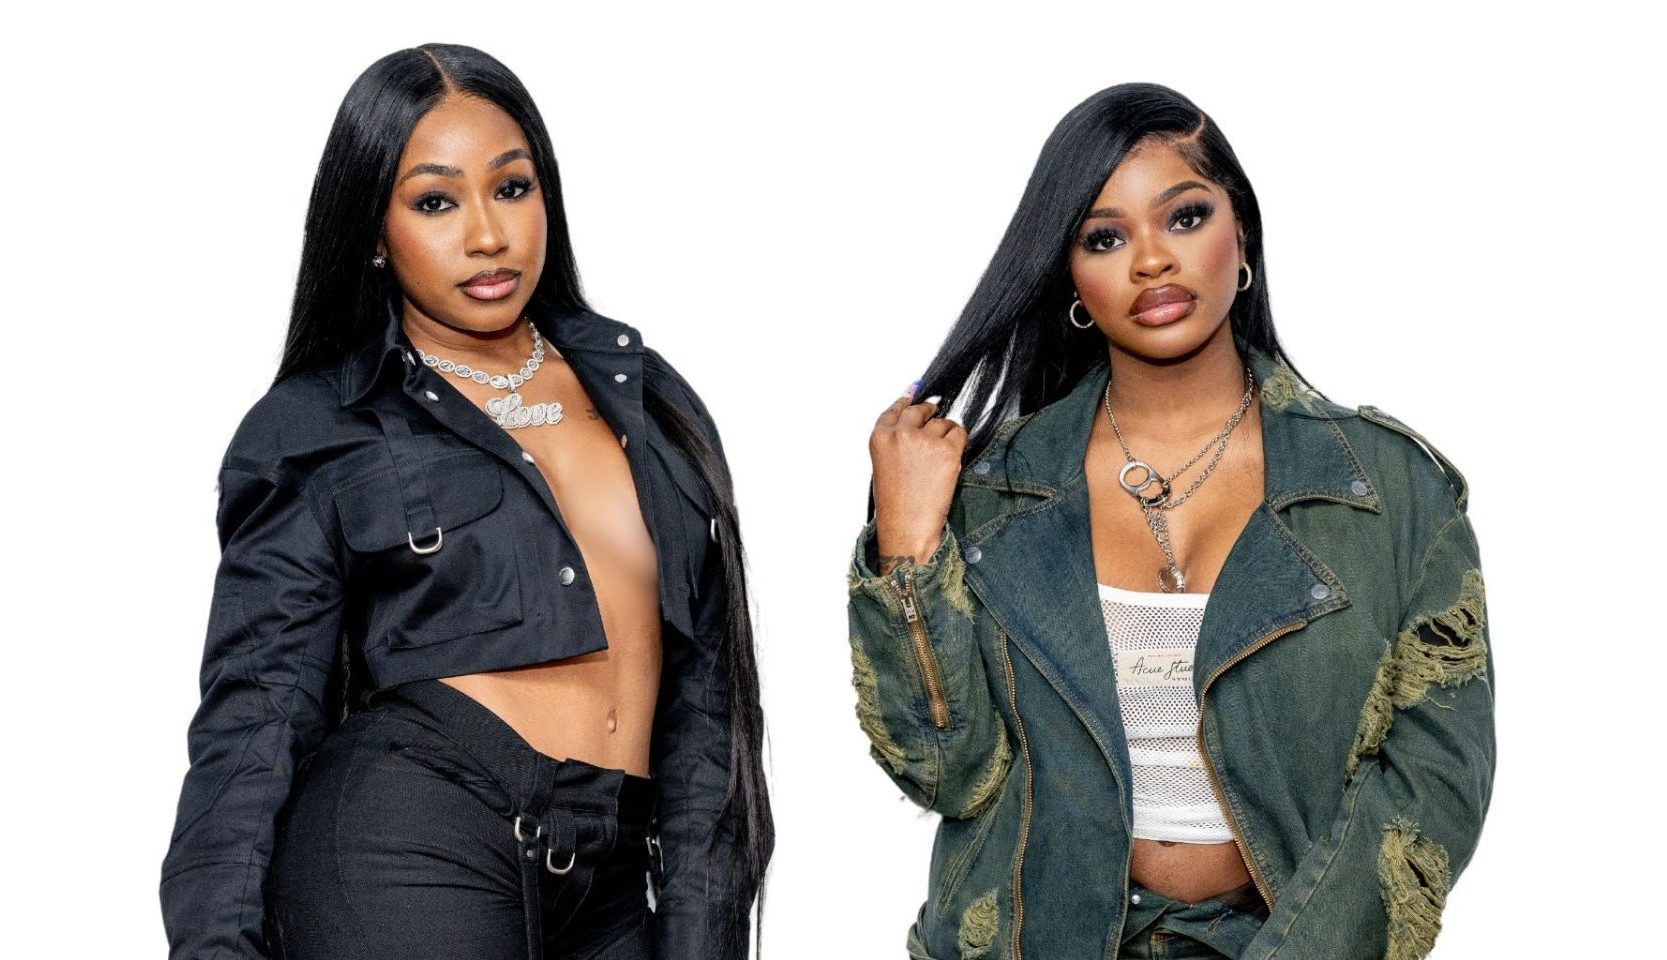 City Girls Era Over? Social Media Reacts As Yung Miami And JT Continue To Hype Their Solo Music thumbnail